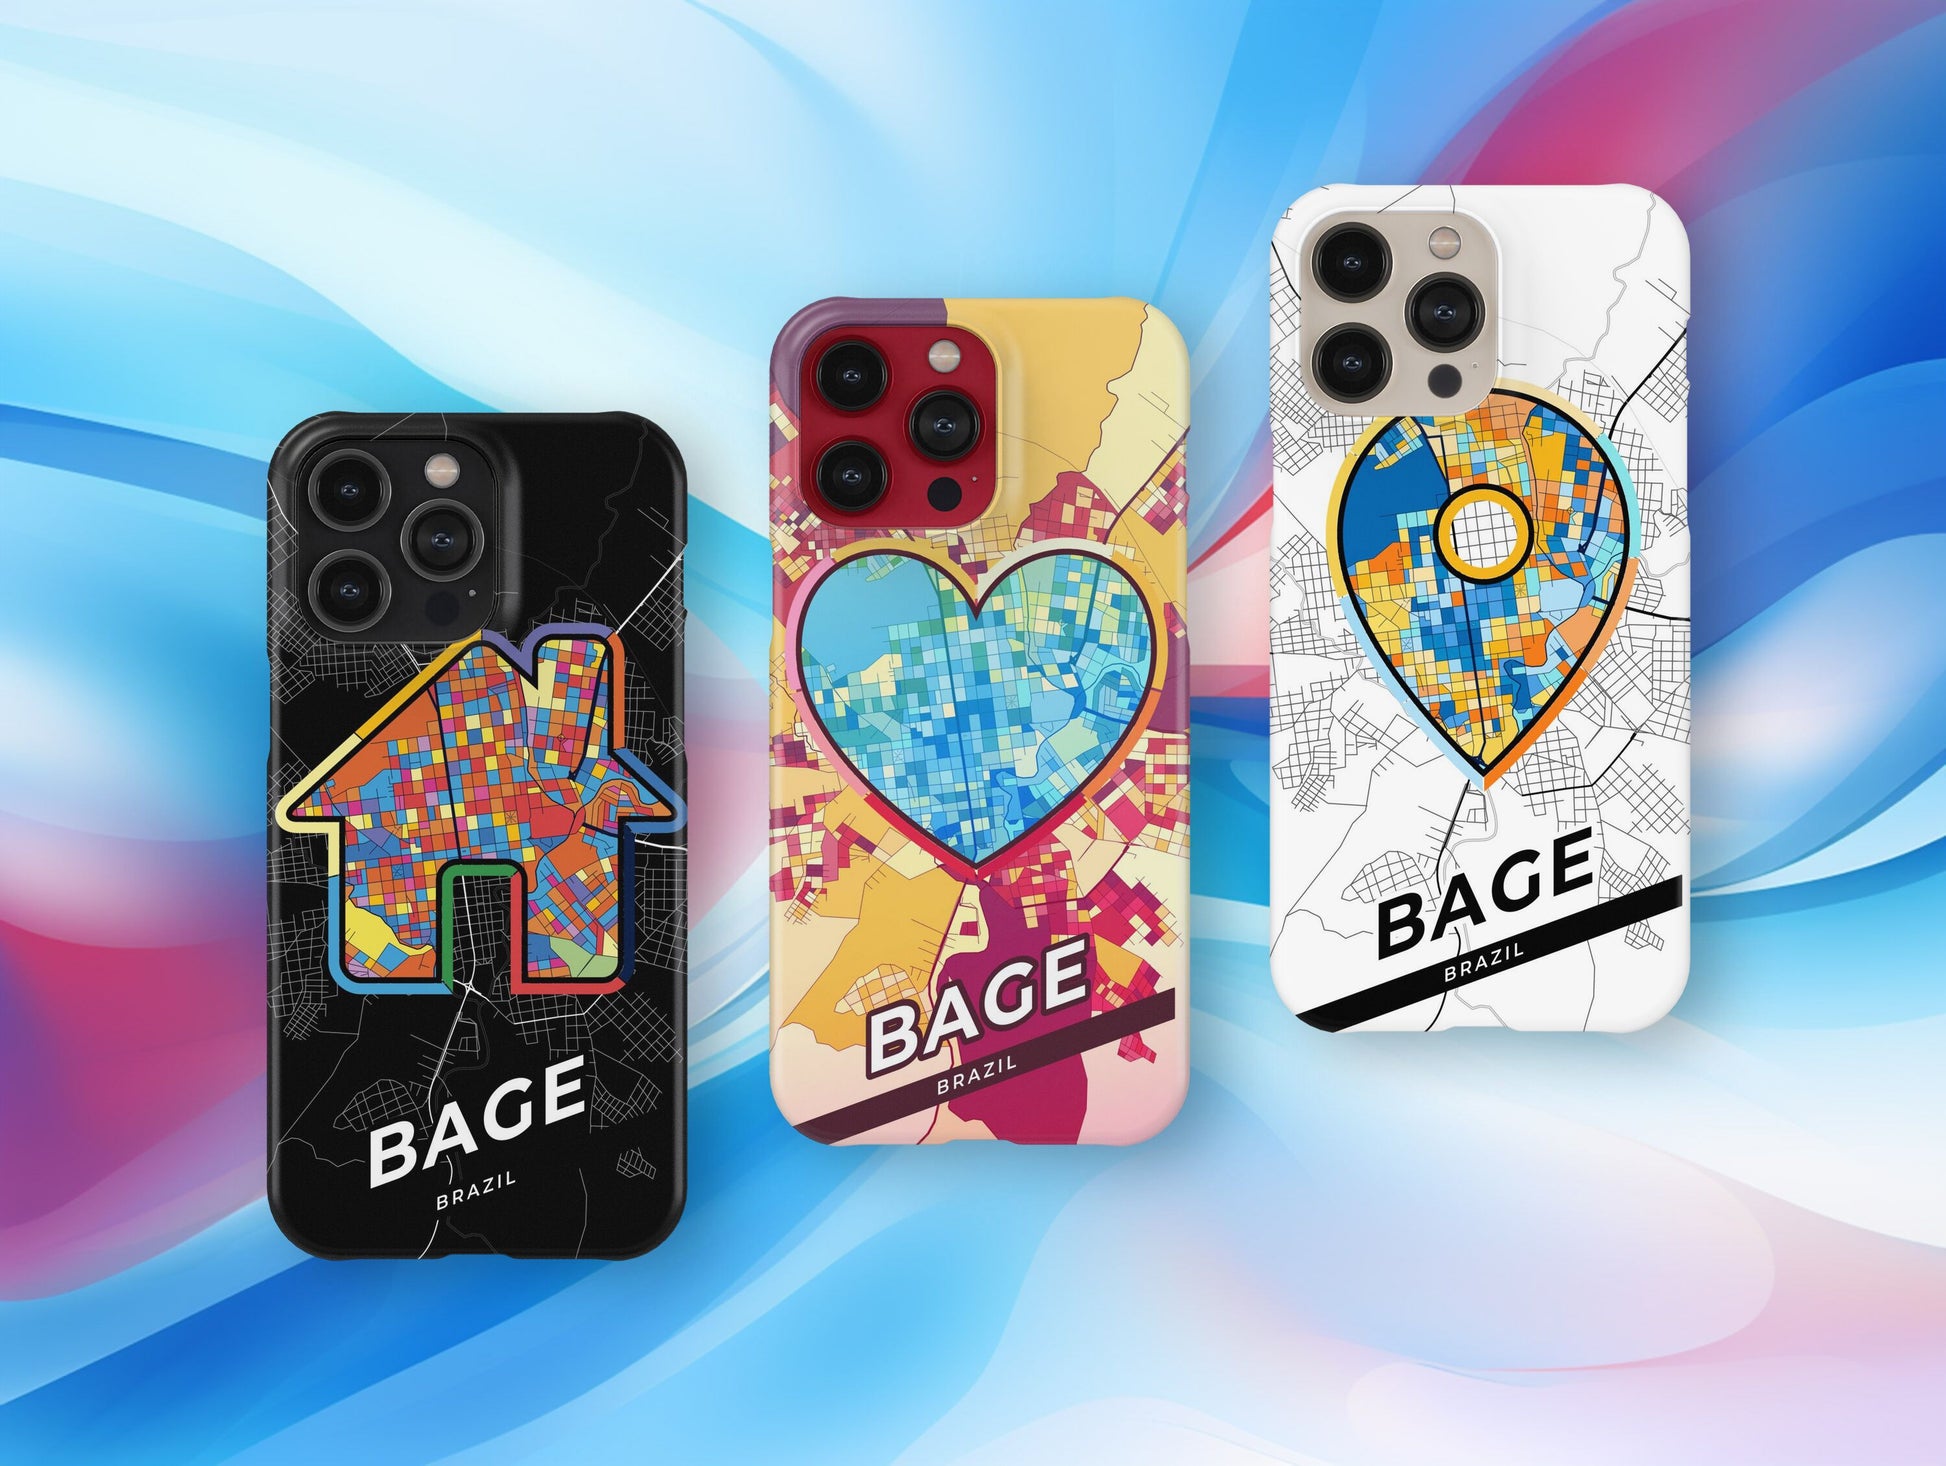 Bage Brazil slim phone case with colorful icon. Birthday, wedding or housewarming gift. Couple match cases.